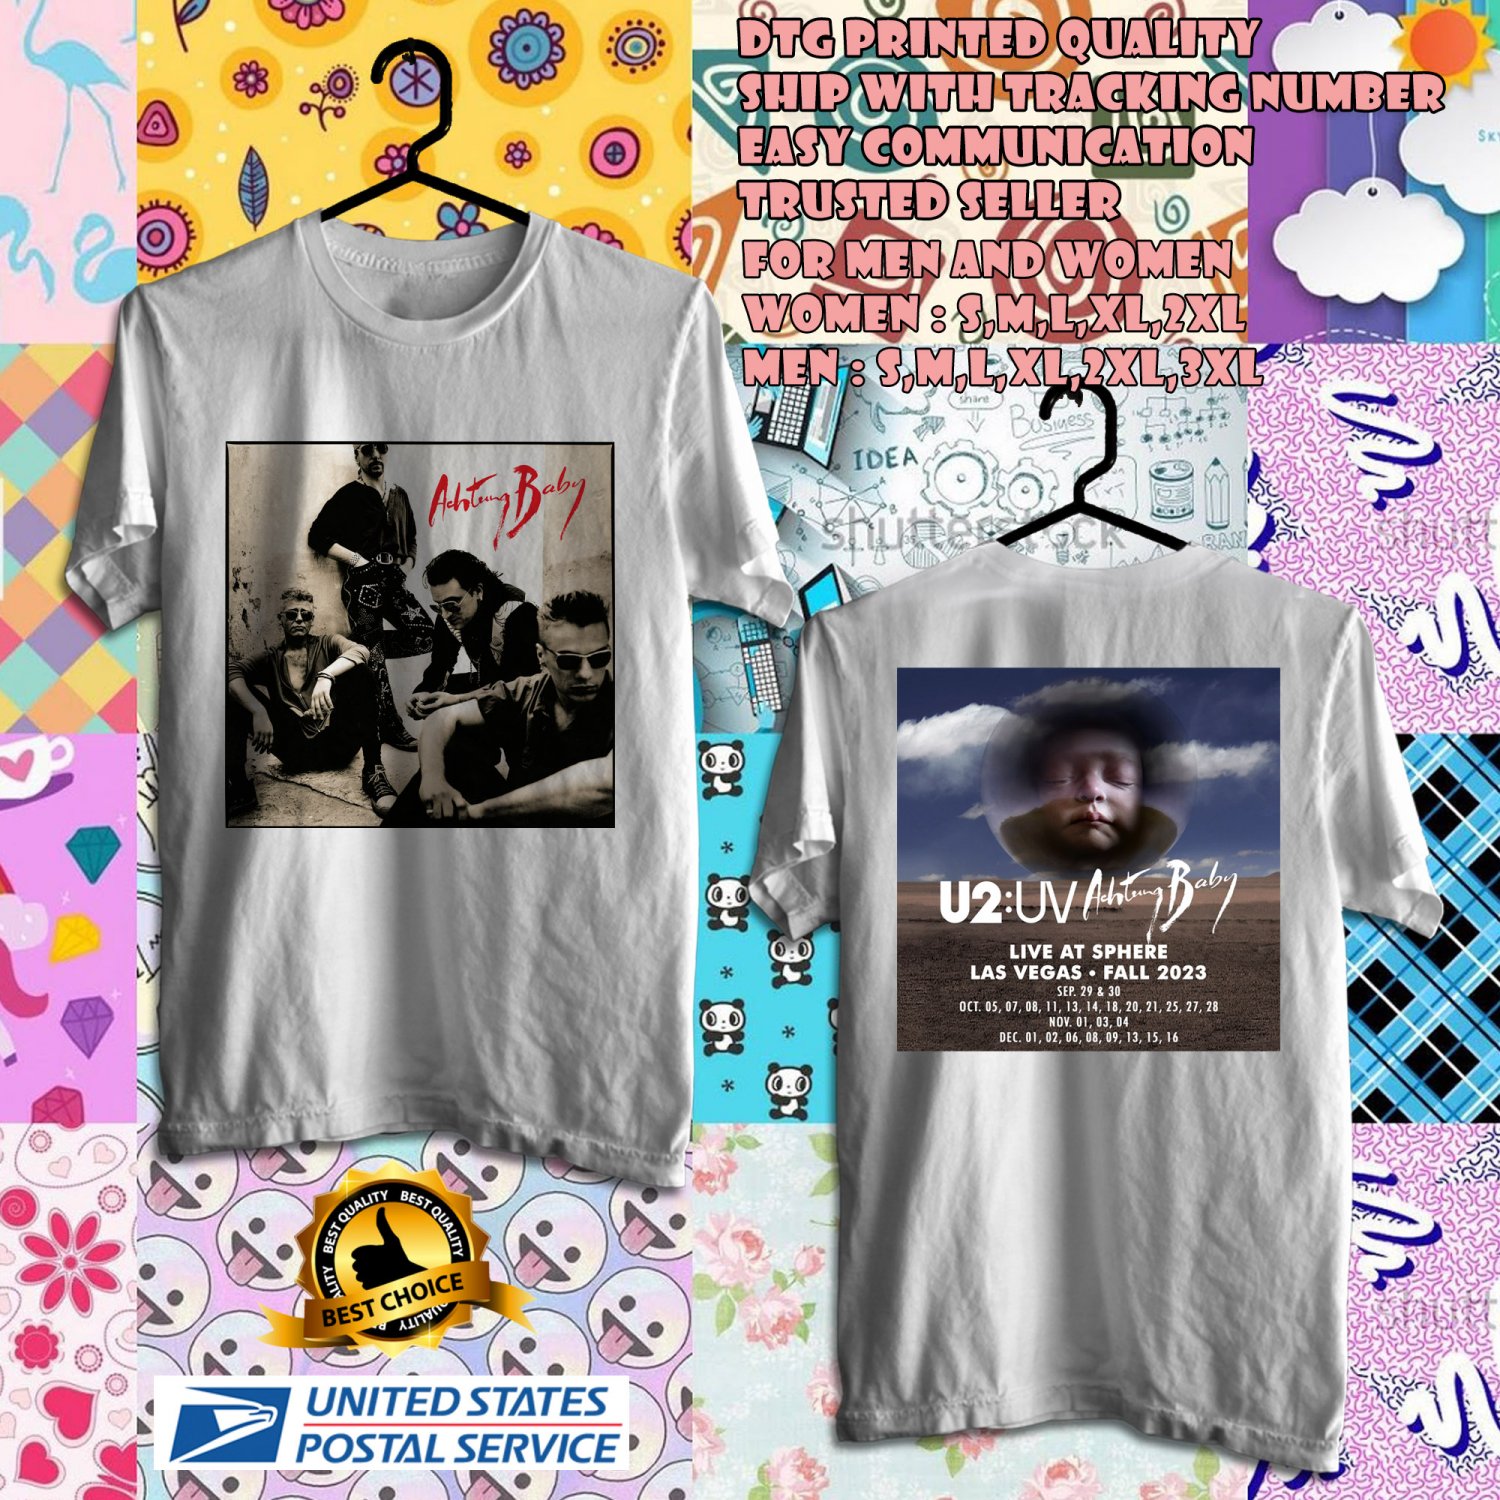 HITS ON 2023 U2 ACHTUNG BABY AT SPHERE LAS VEGAS TOUR WHITE TEE SHIRT W